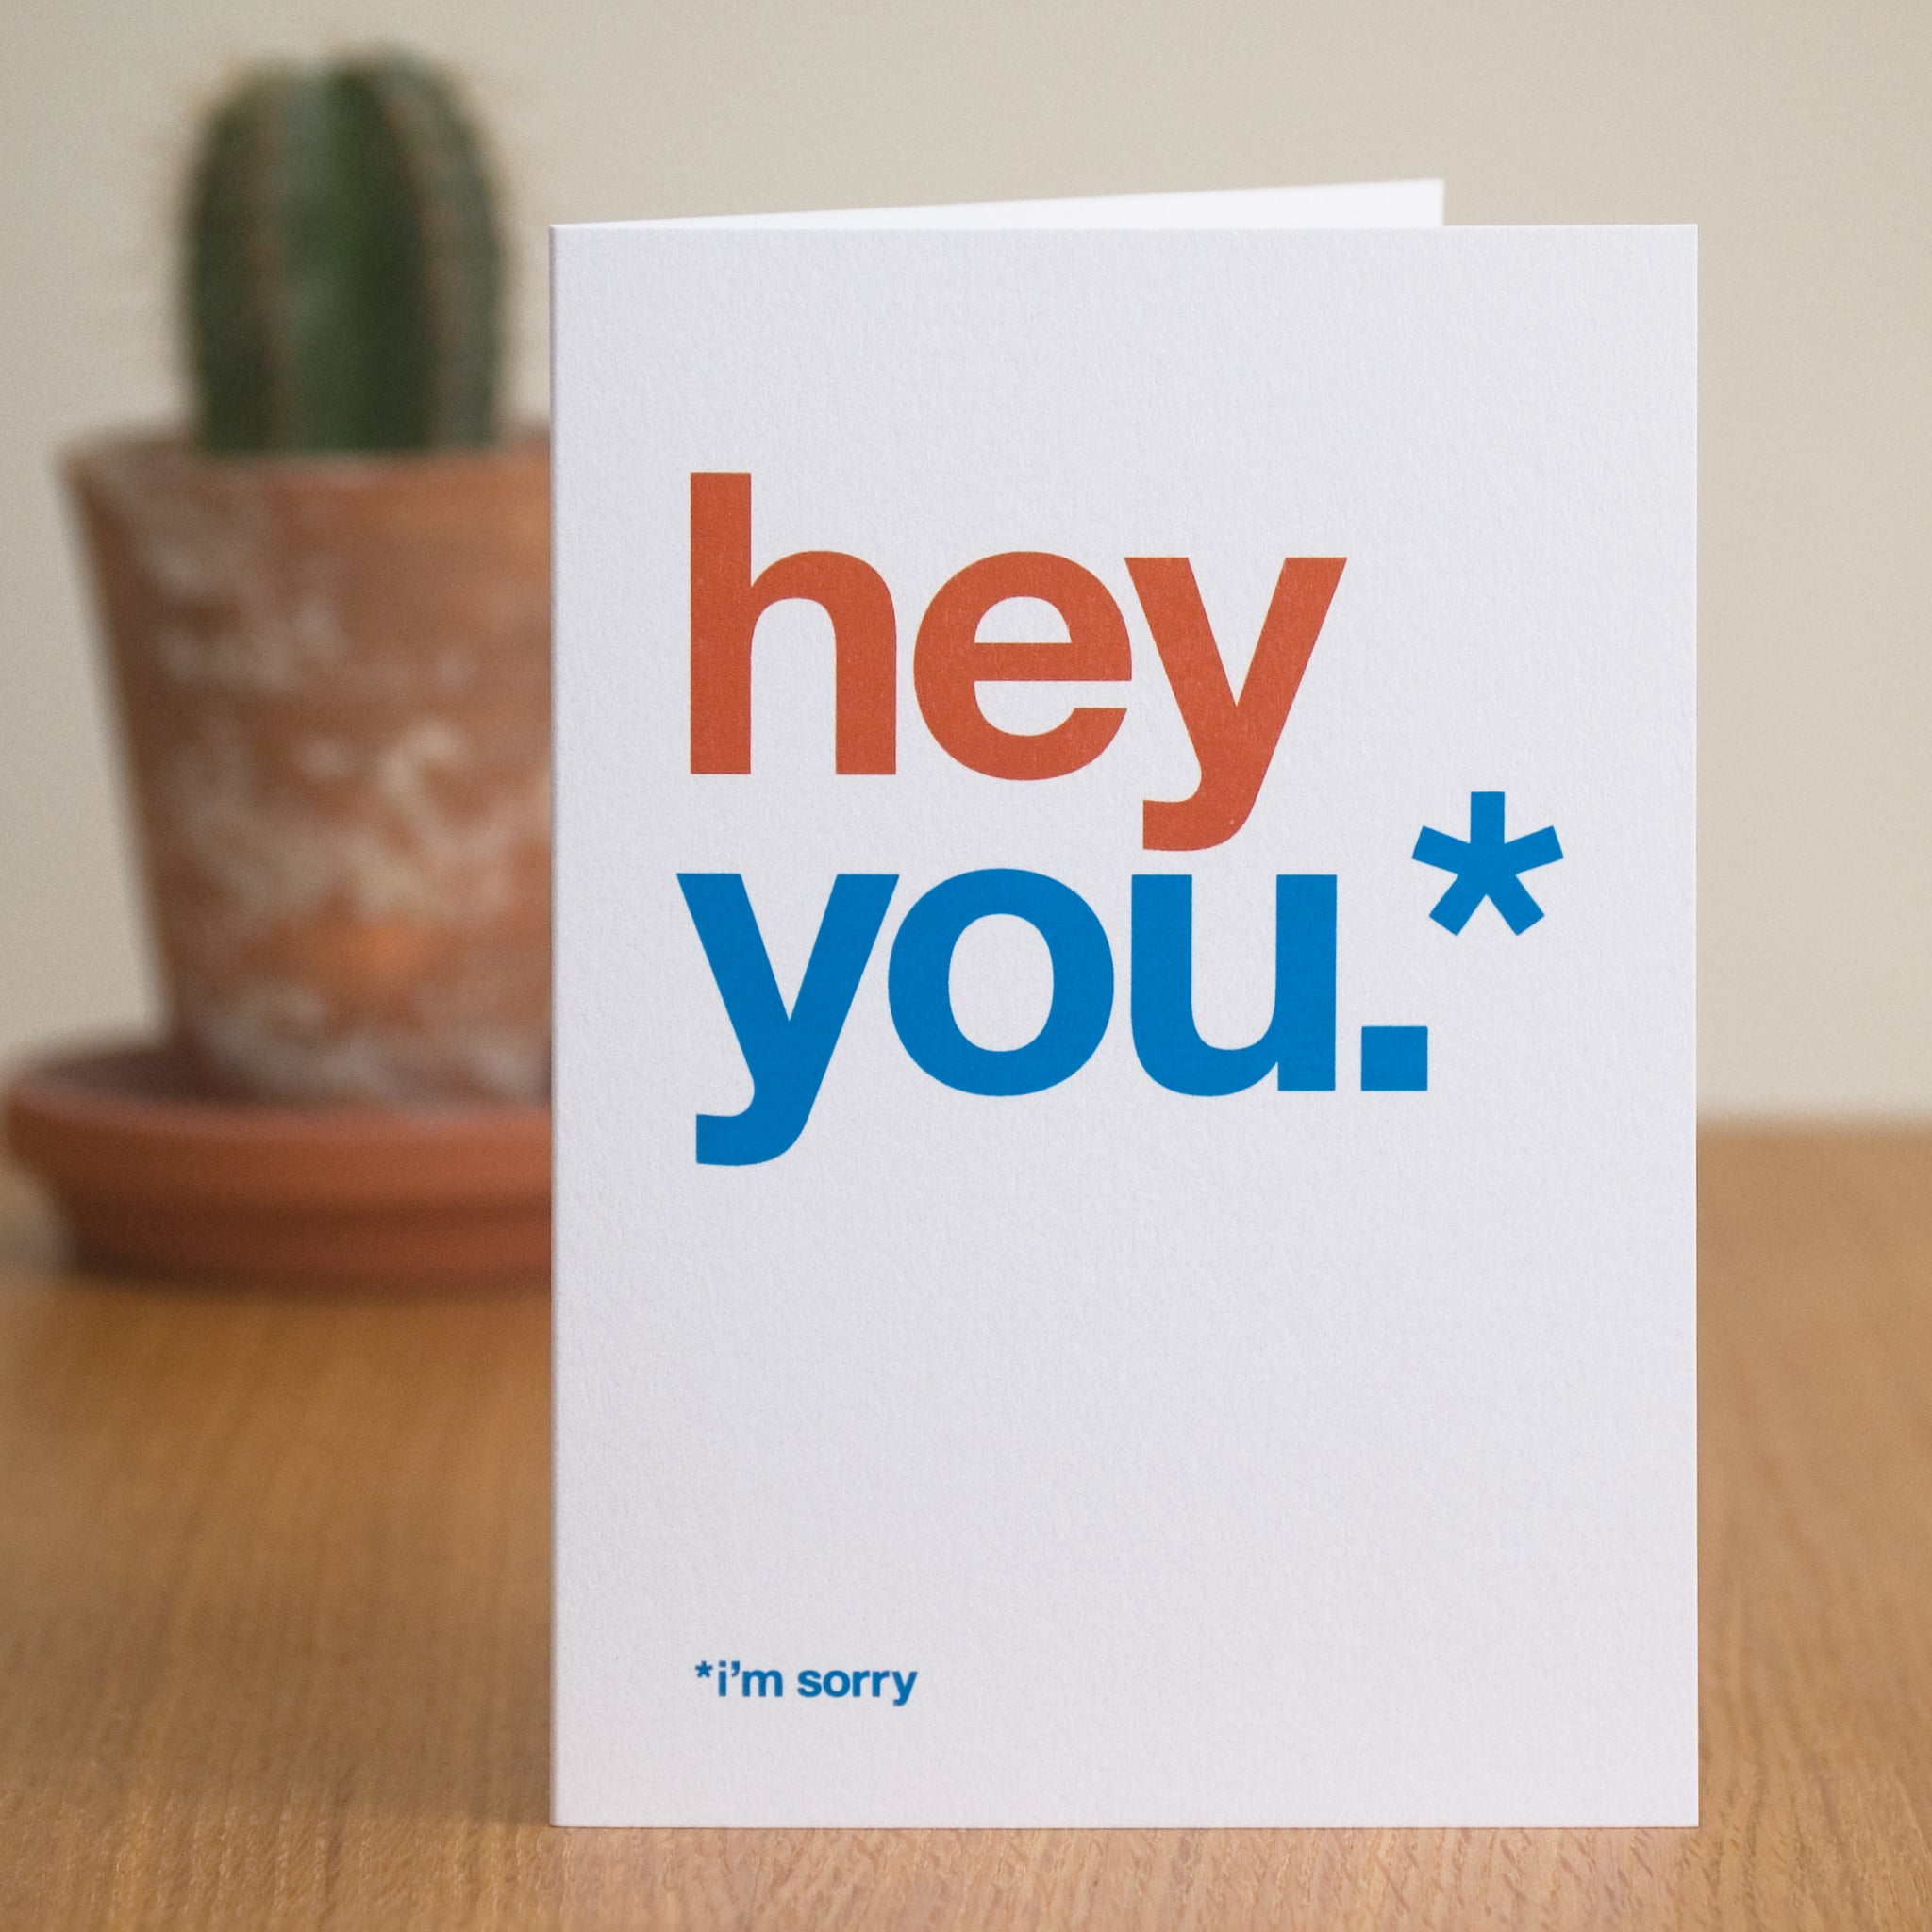 A greetings card saying 'hey you' in large letters and then 'i'm sorry' in small letters underneath.